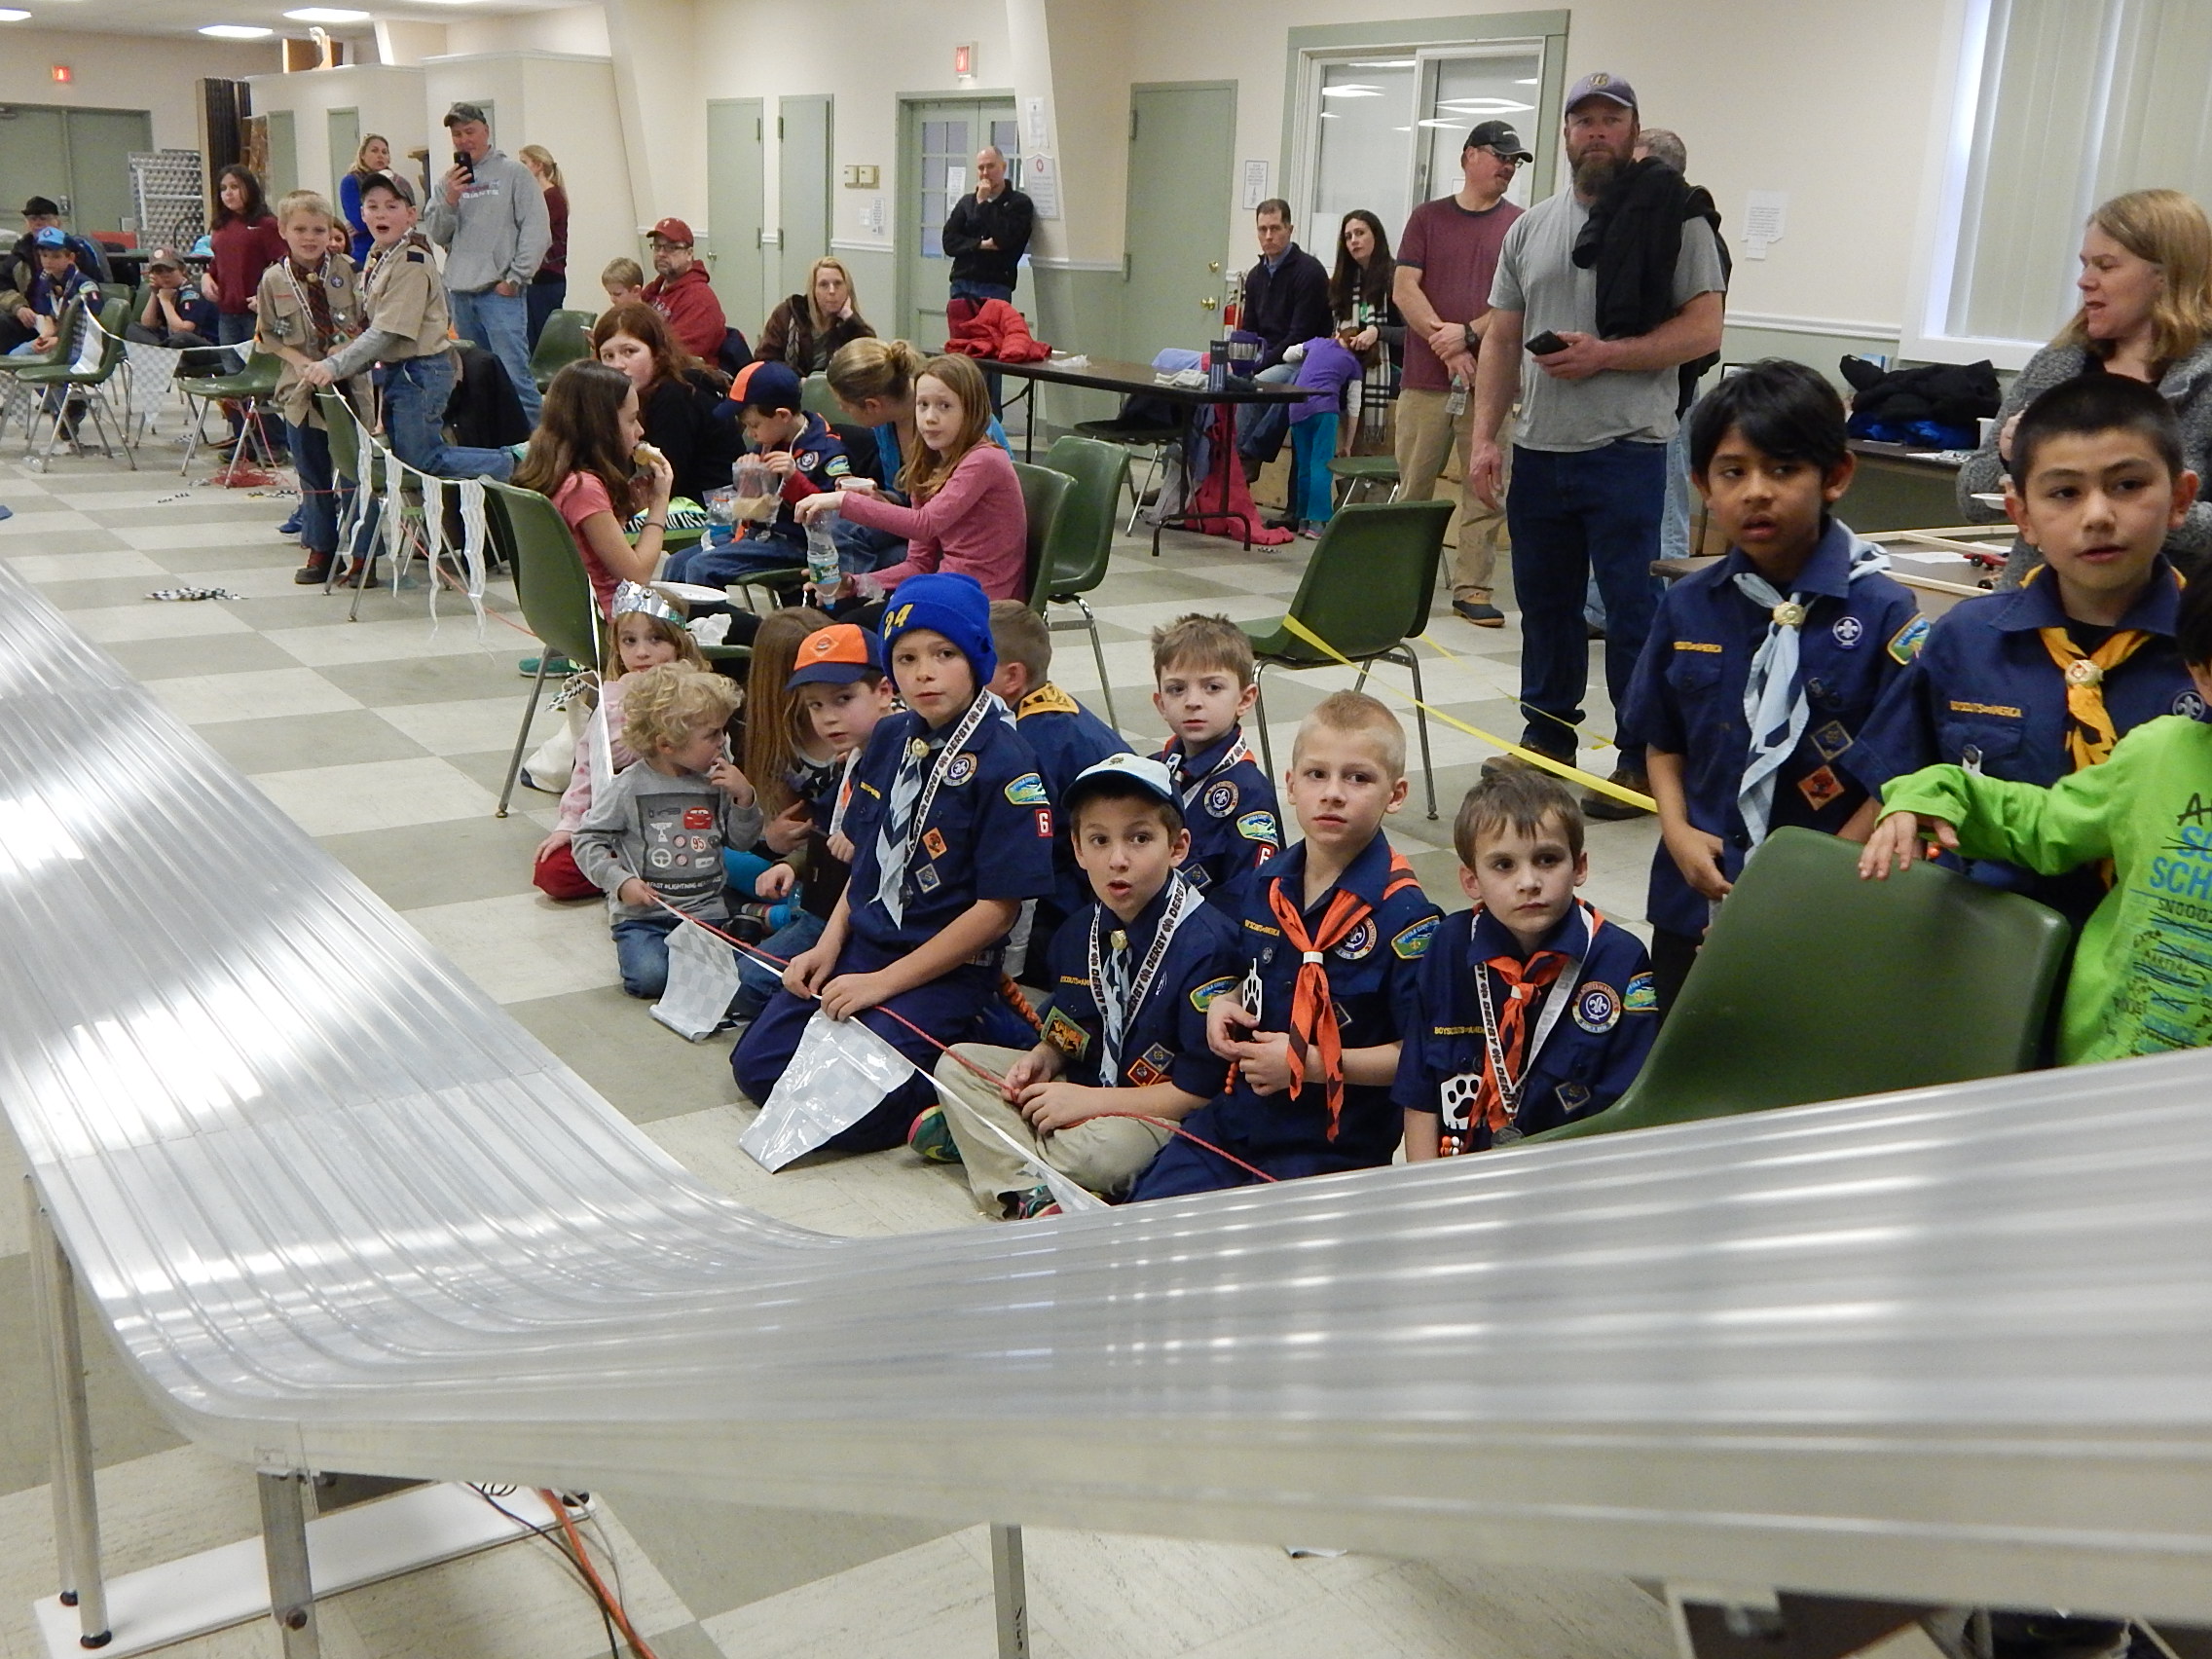 Courtesy photos of the Cub Scouts'Pack 6 Pinewood Derby night by Derek Bossen.